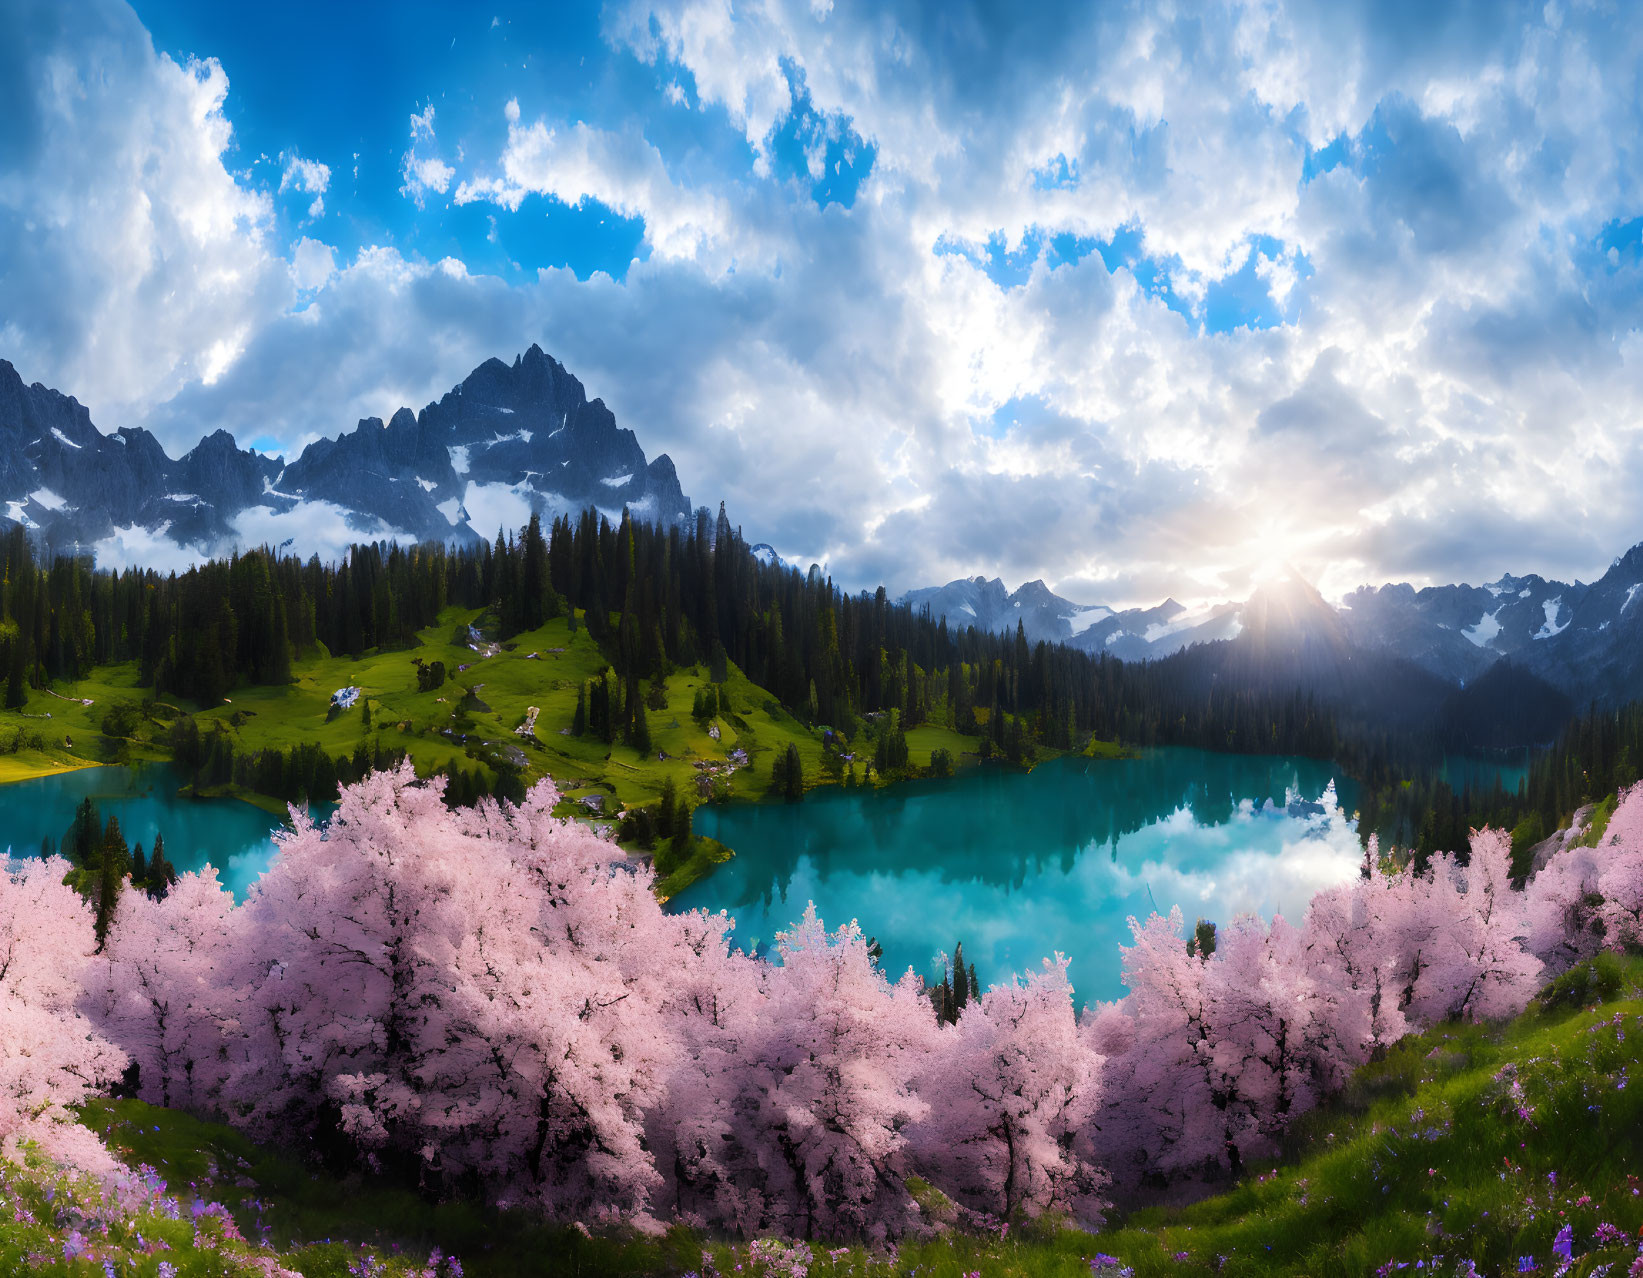 Tranquil landscape with turquoise lake, pink cherry blossoms, and majestic mountains